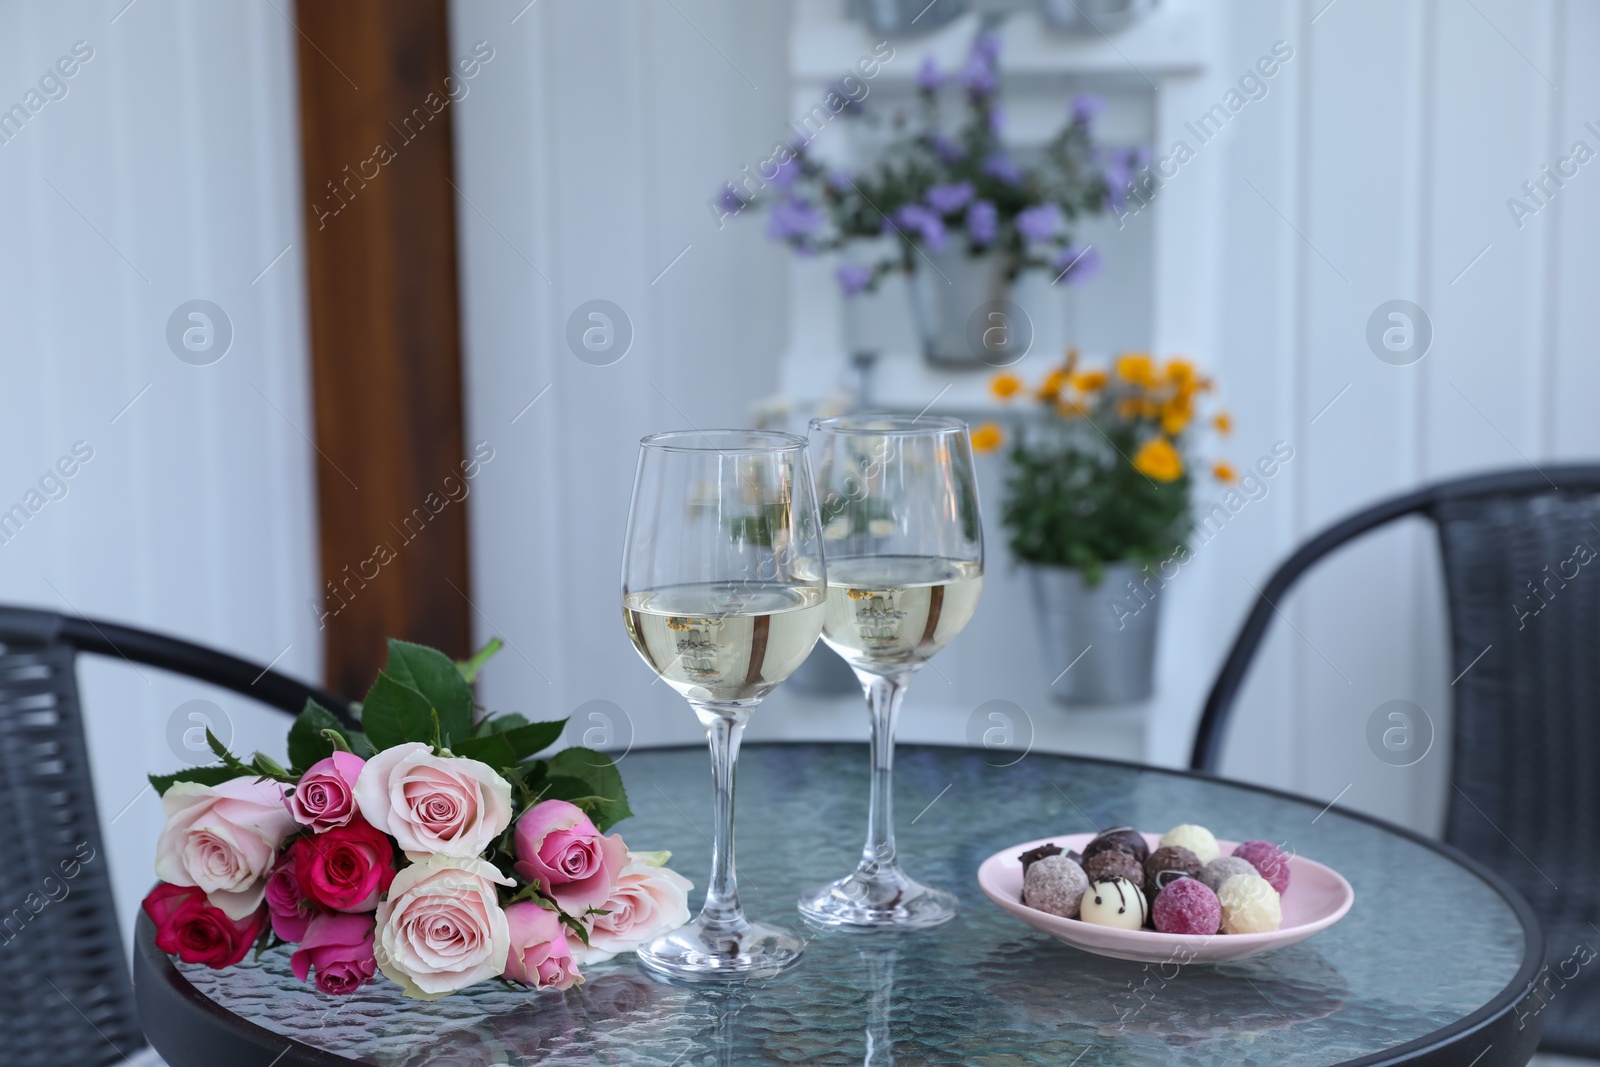 Photo of Bouquet of roses, glasses with wine and candies on glass table on outdoor terrace